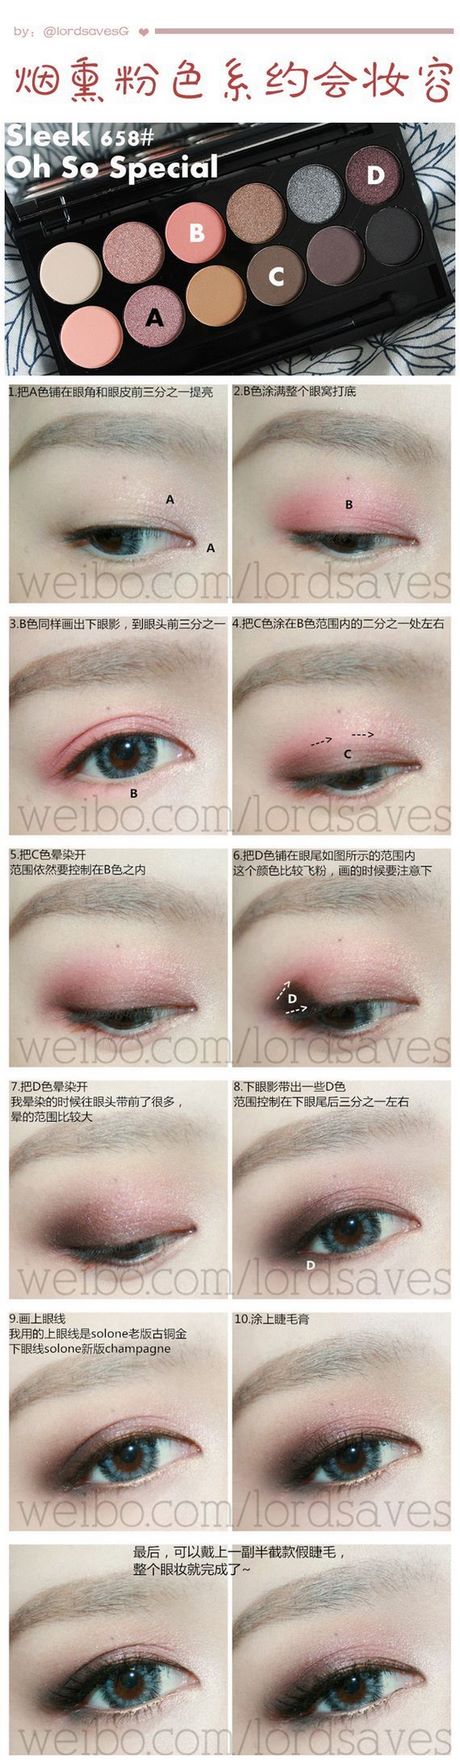 Chinese look make-up tutorial